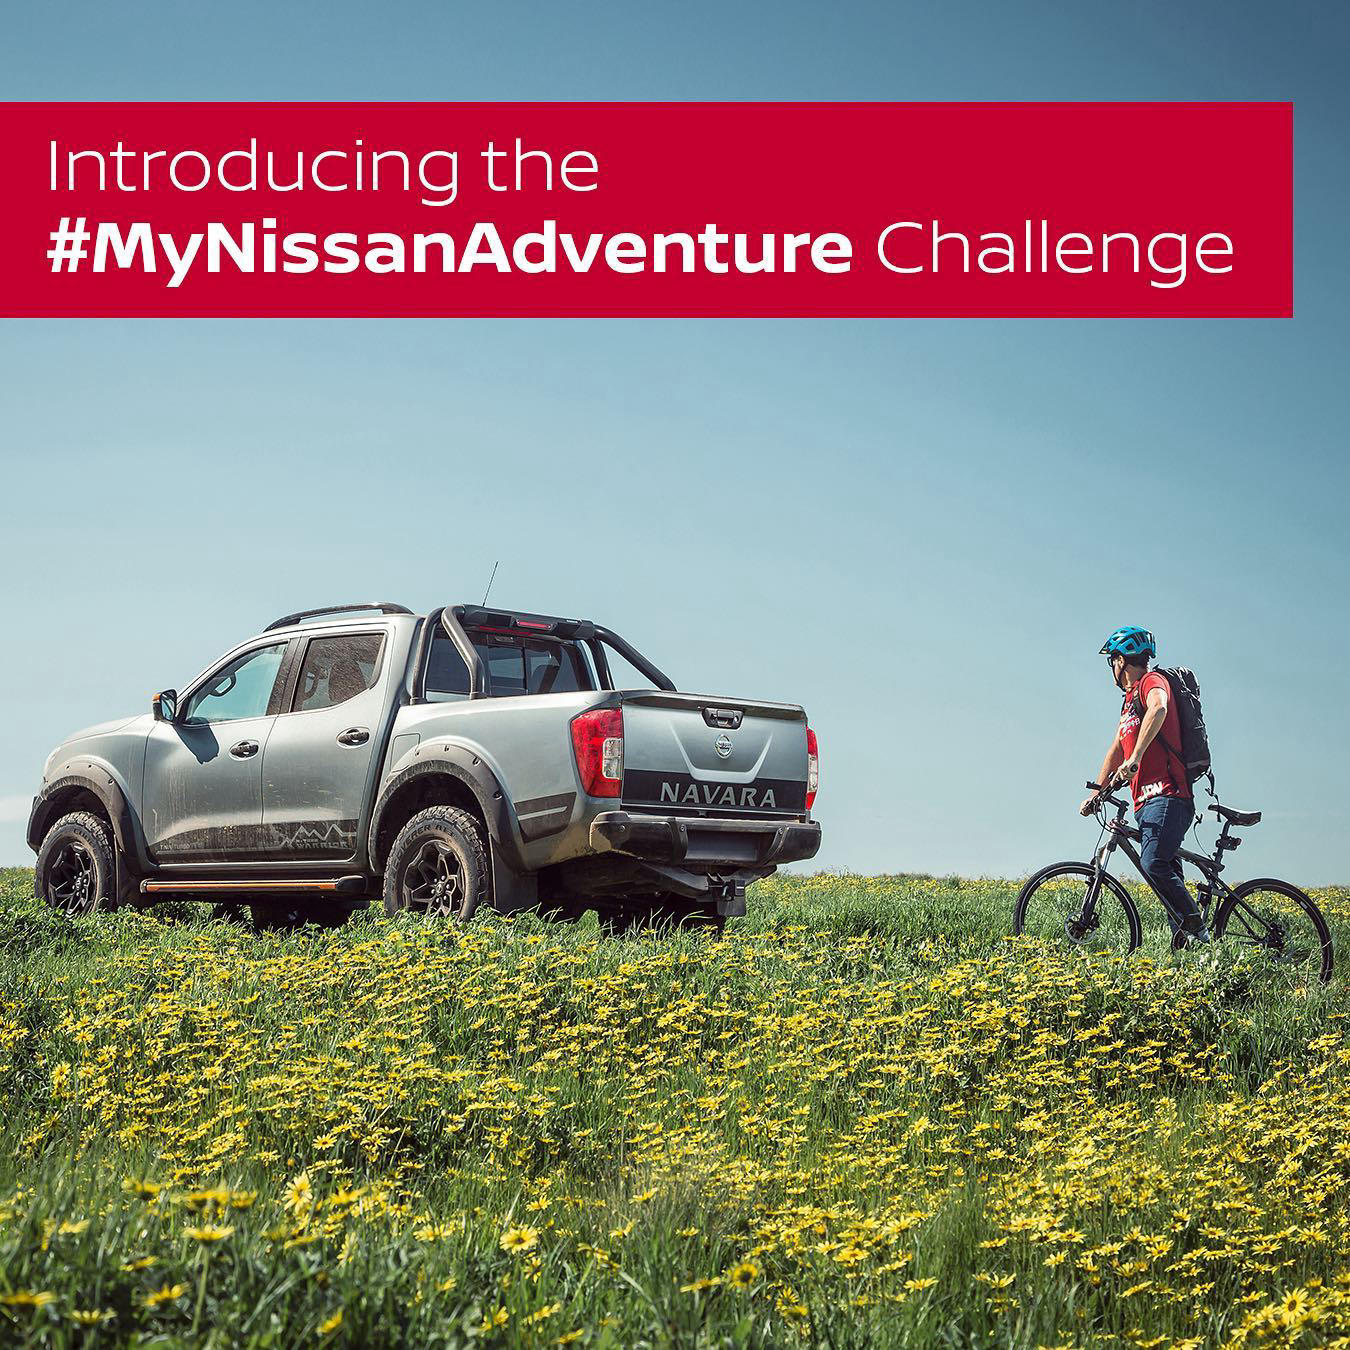 Spring is in the air, and we want to see your Nissan enjoying the season